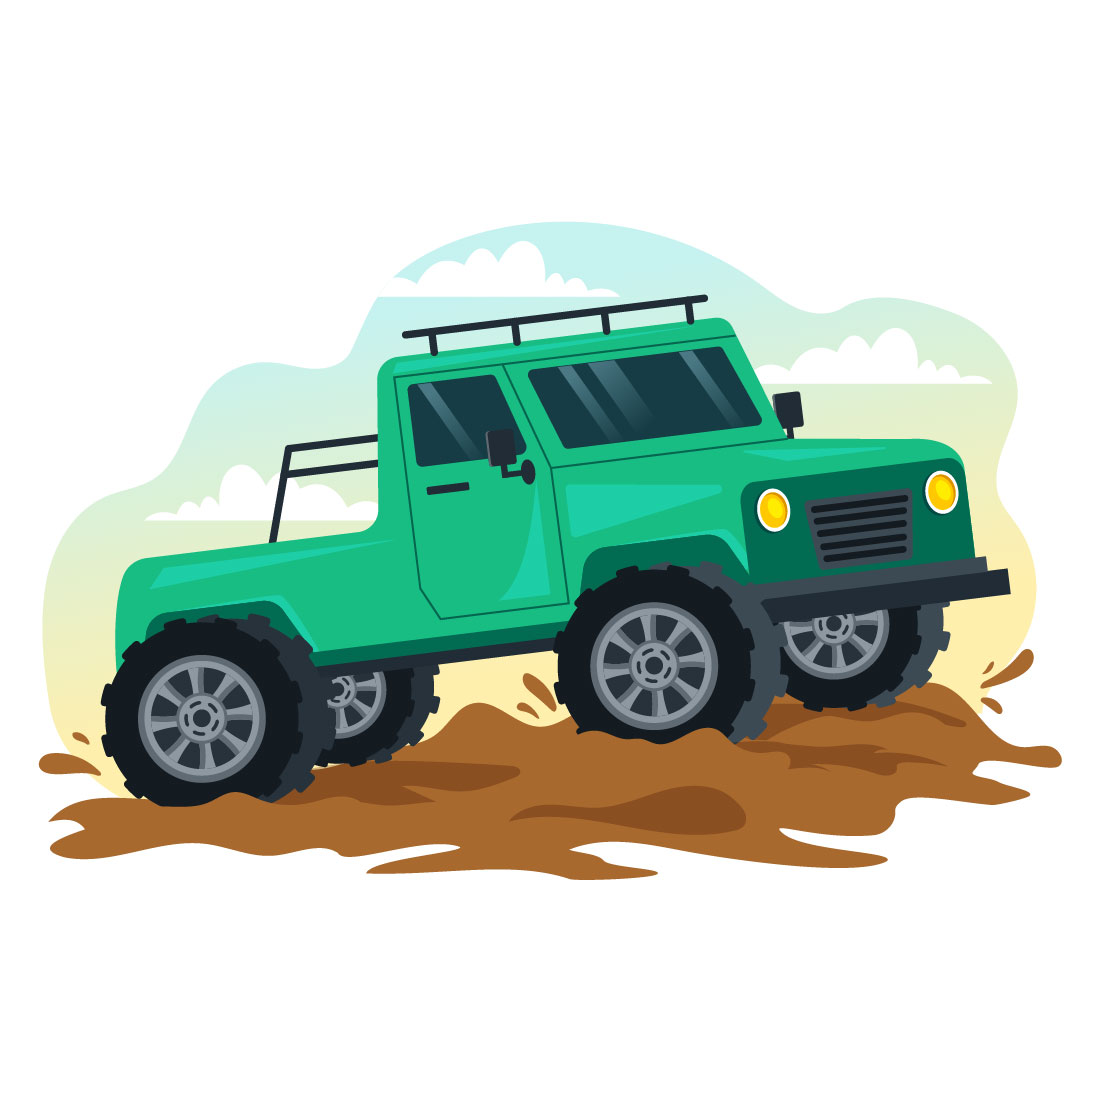 14 Off Road Vehicle Illustration cover image.